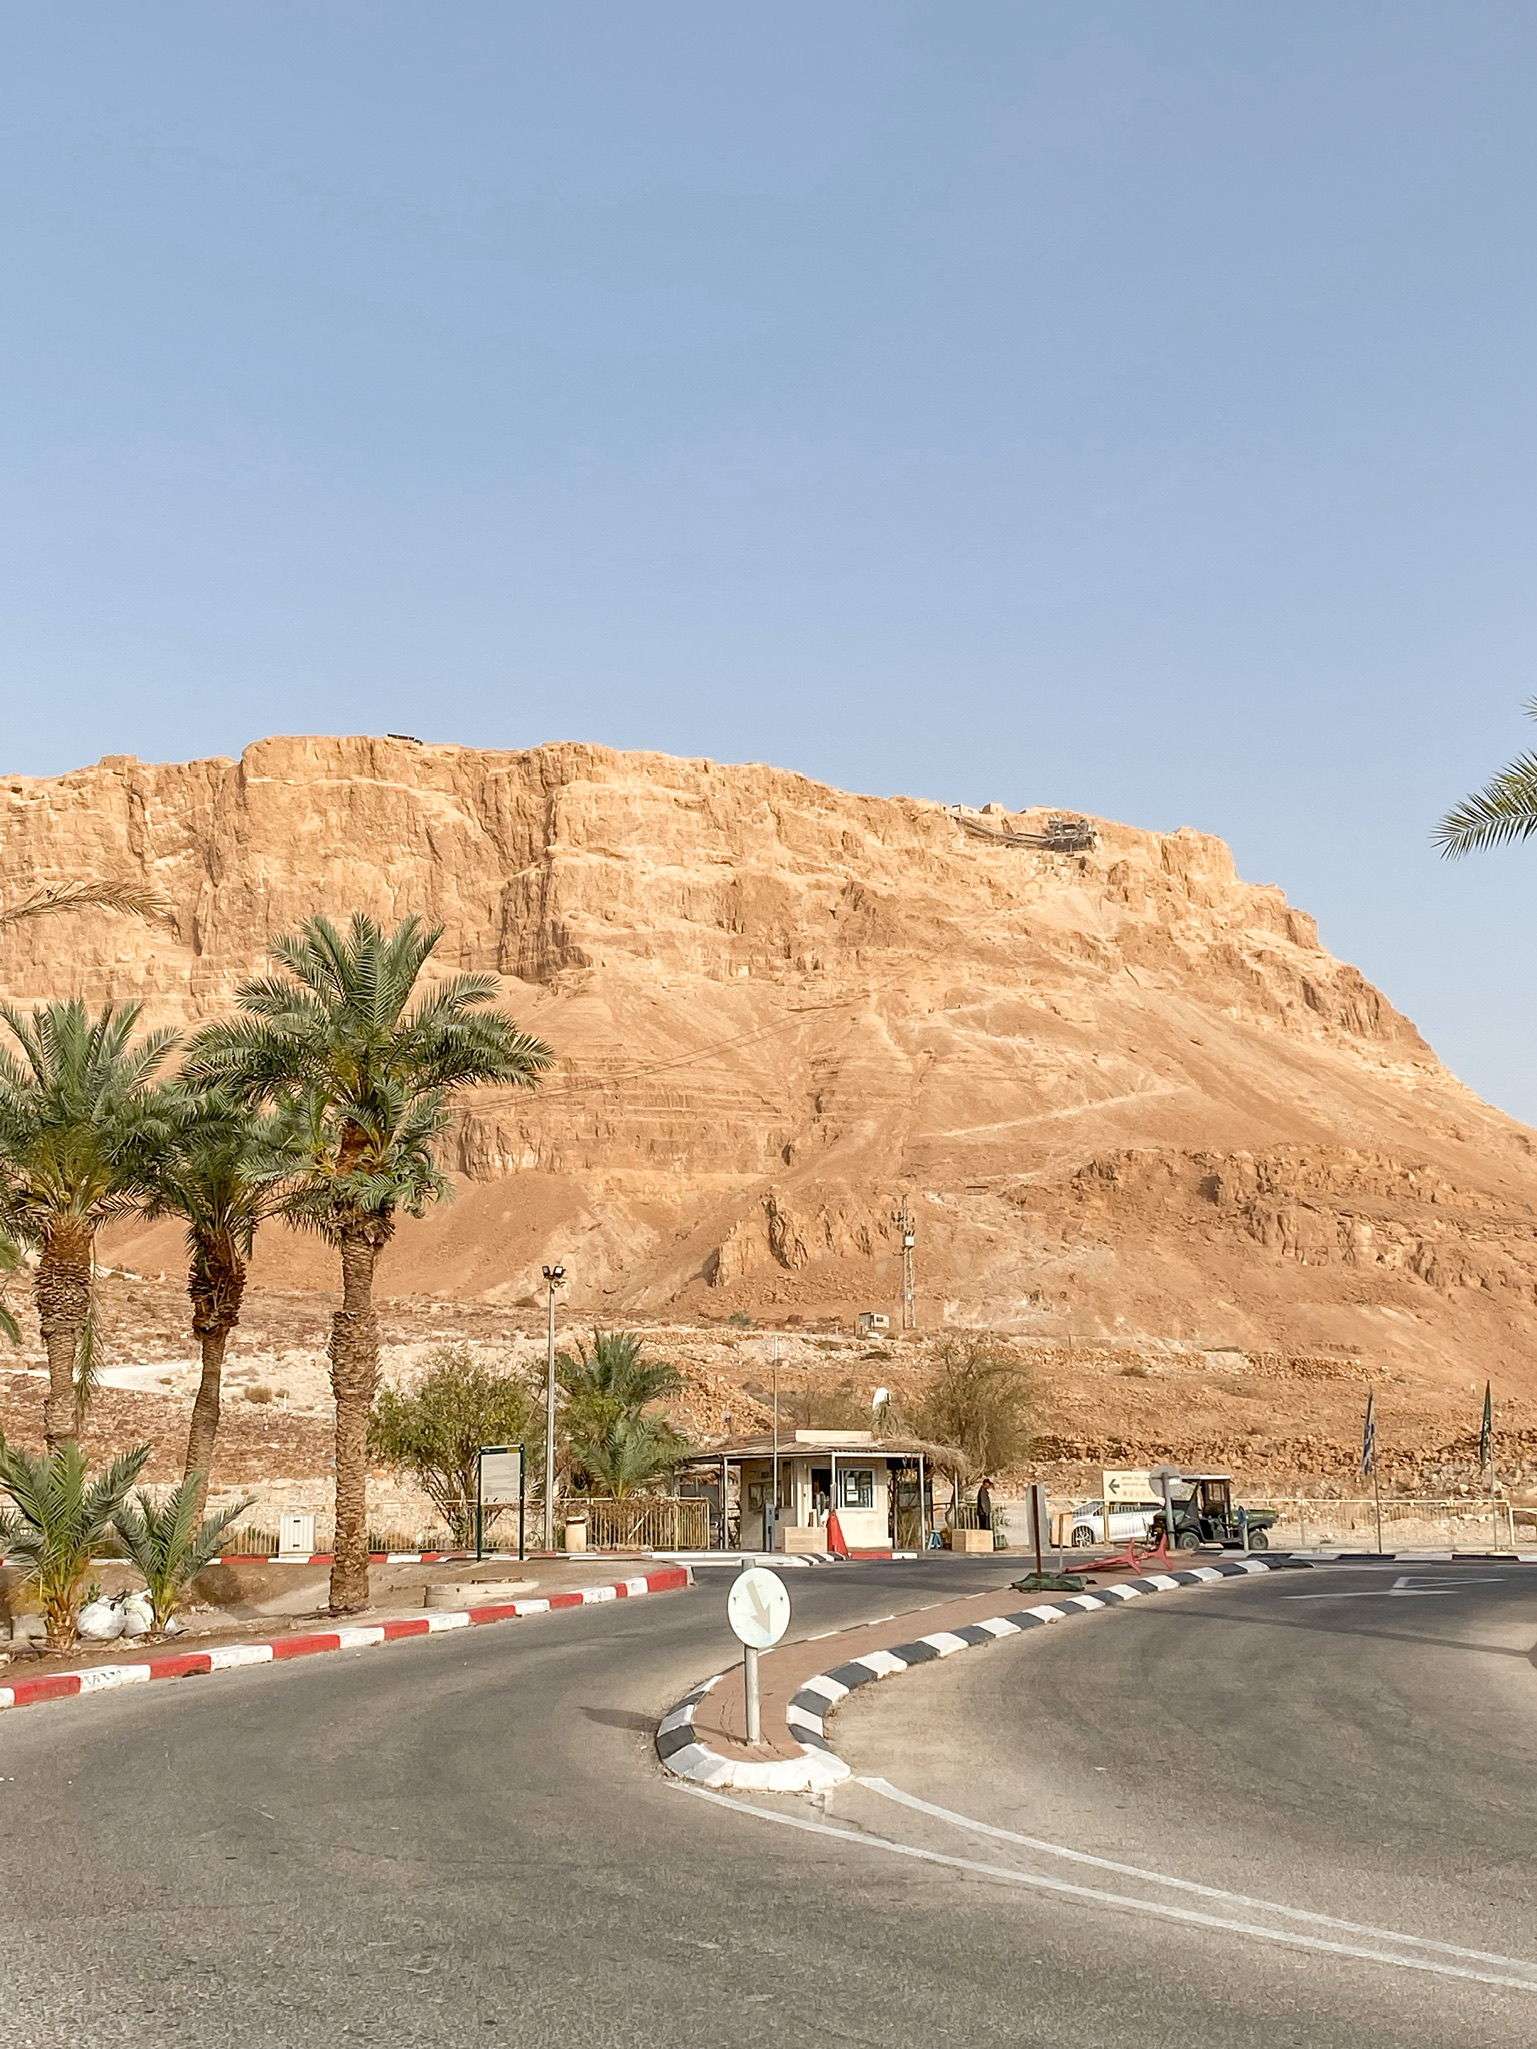 planning a trip to the middle east, where to go in the middle east, how to plan a trip to the middle east, Masada National Park, Israel, erin busbee, busbee style, busbee family travels, Masada National Park trip, snake path, hiking in masada, hiking the snake path